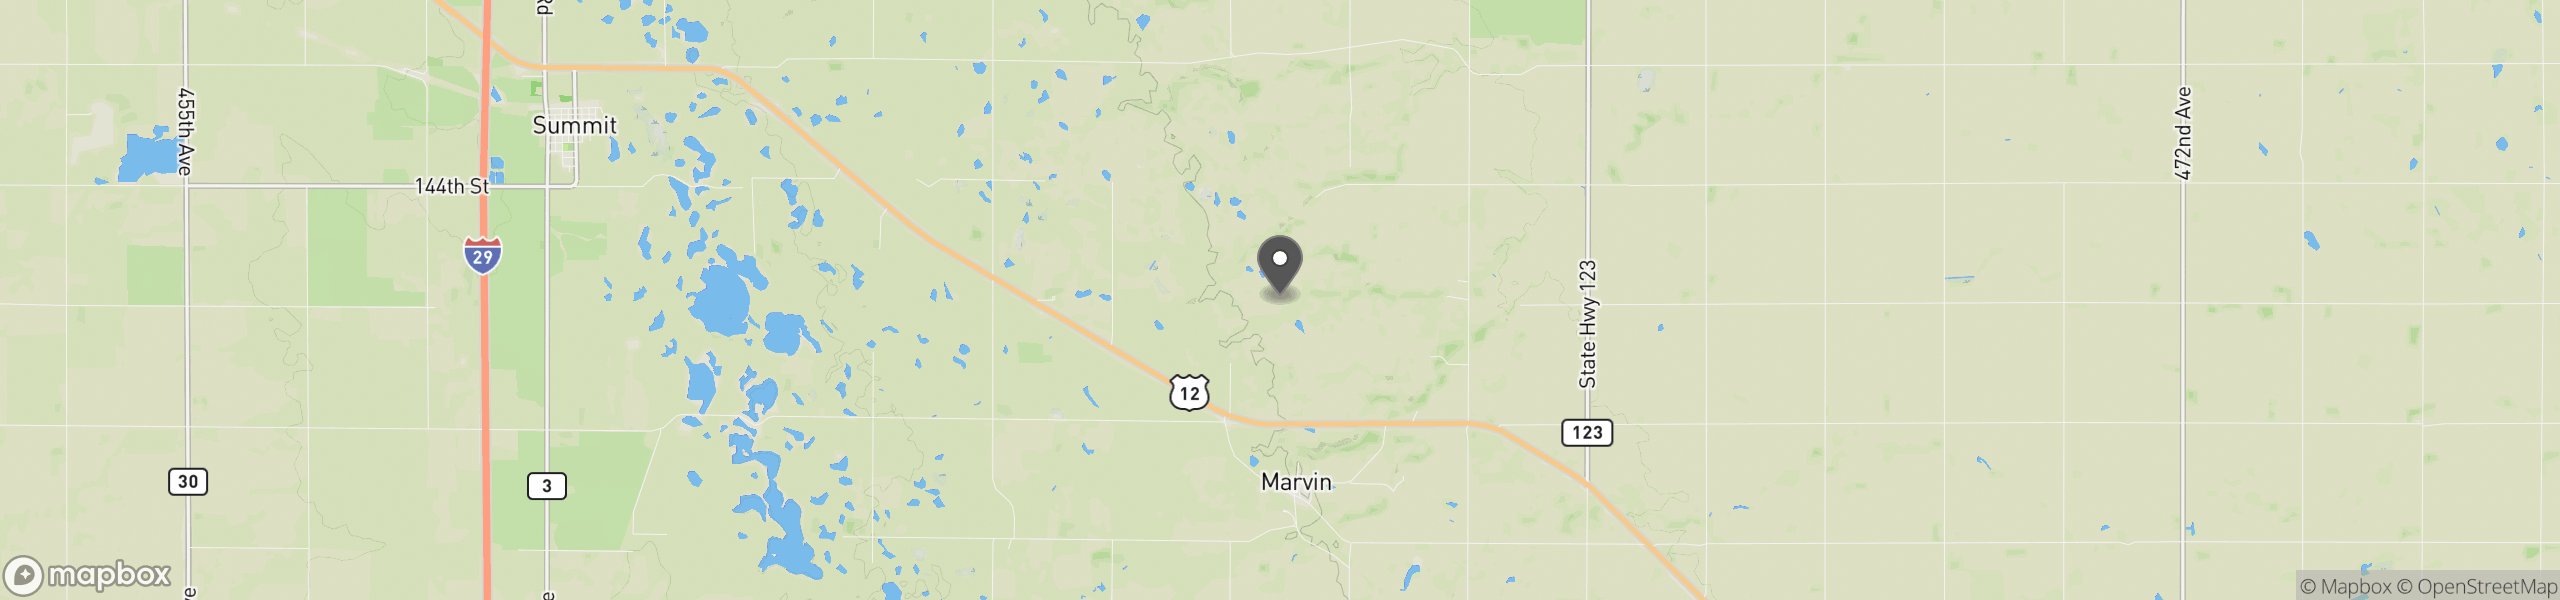 Marvin, SD 57251